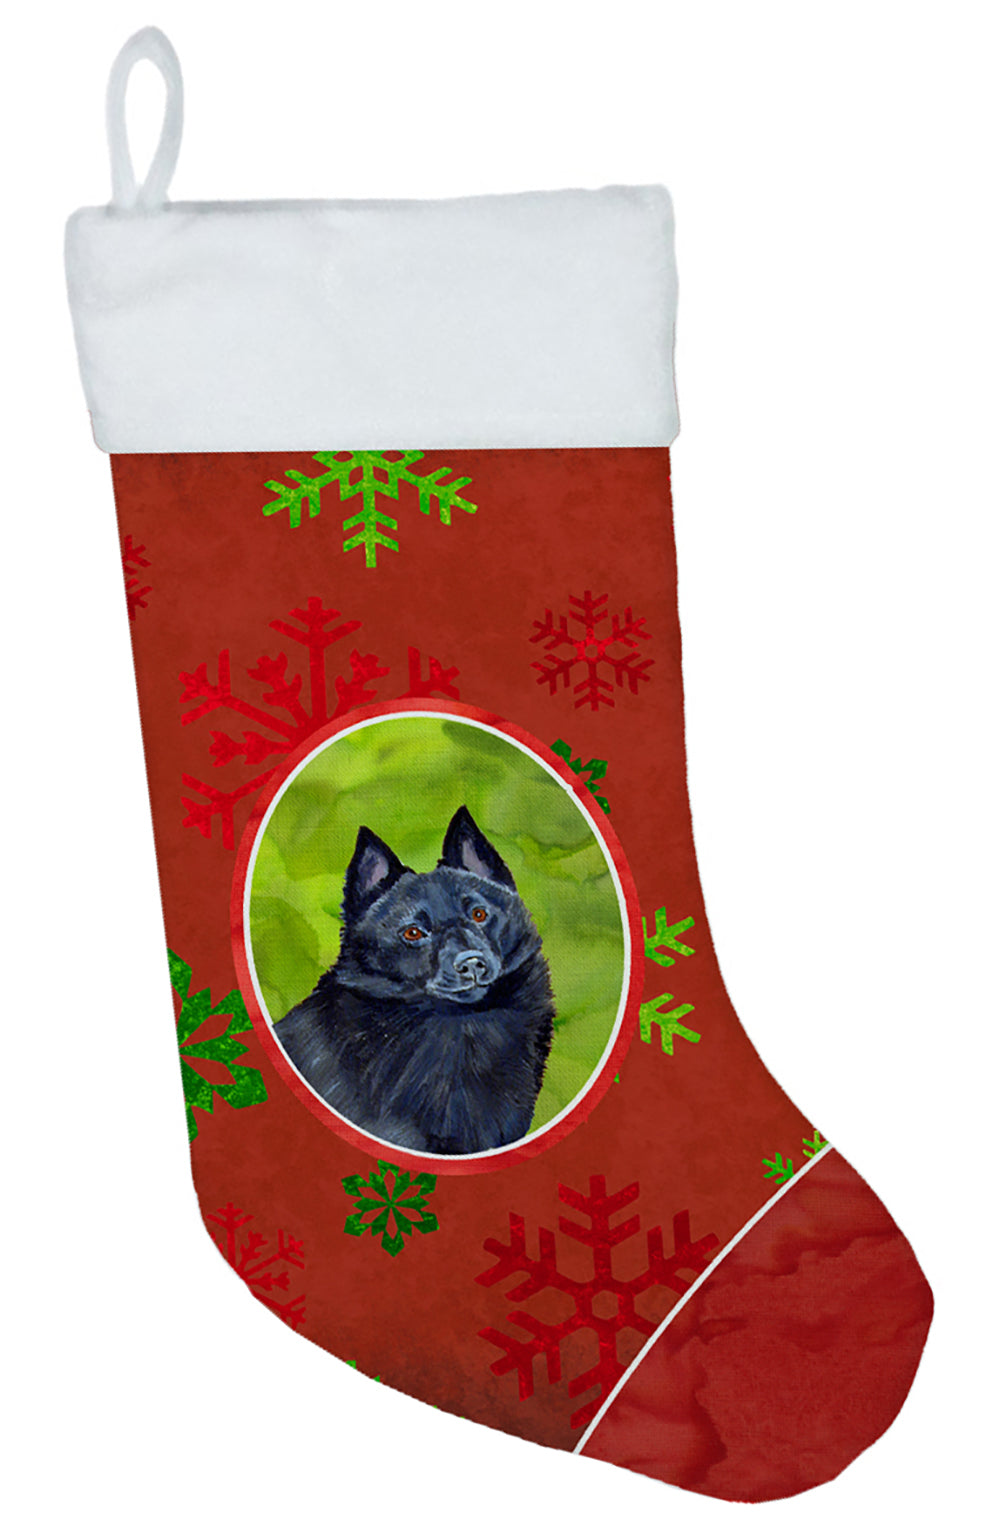 Schipperke Red and Green Snowflakes Holiday Christmas Christmas Stocking LH9339